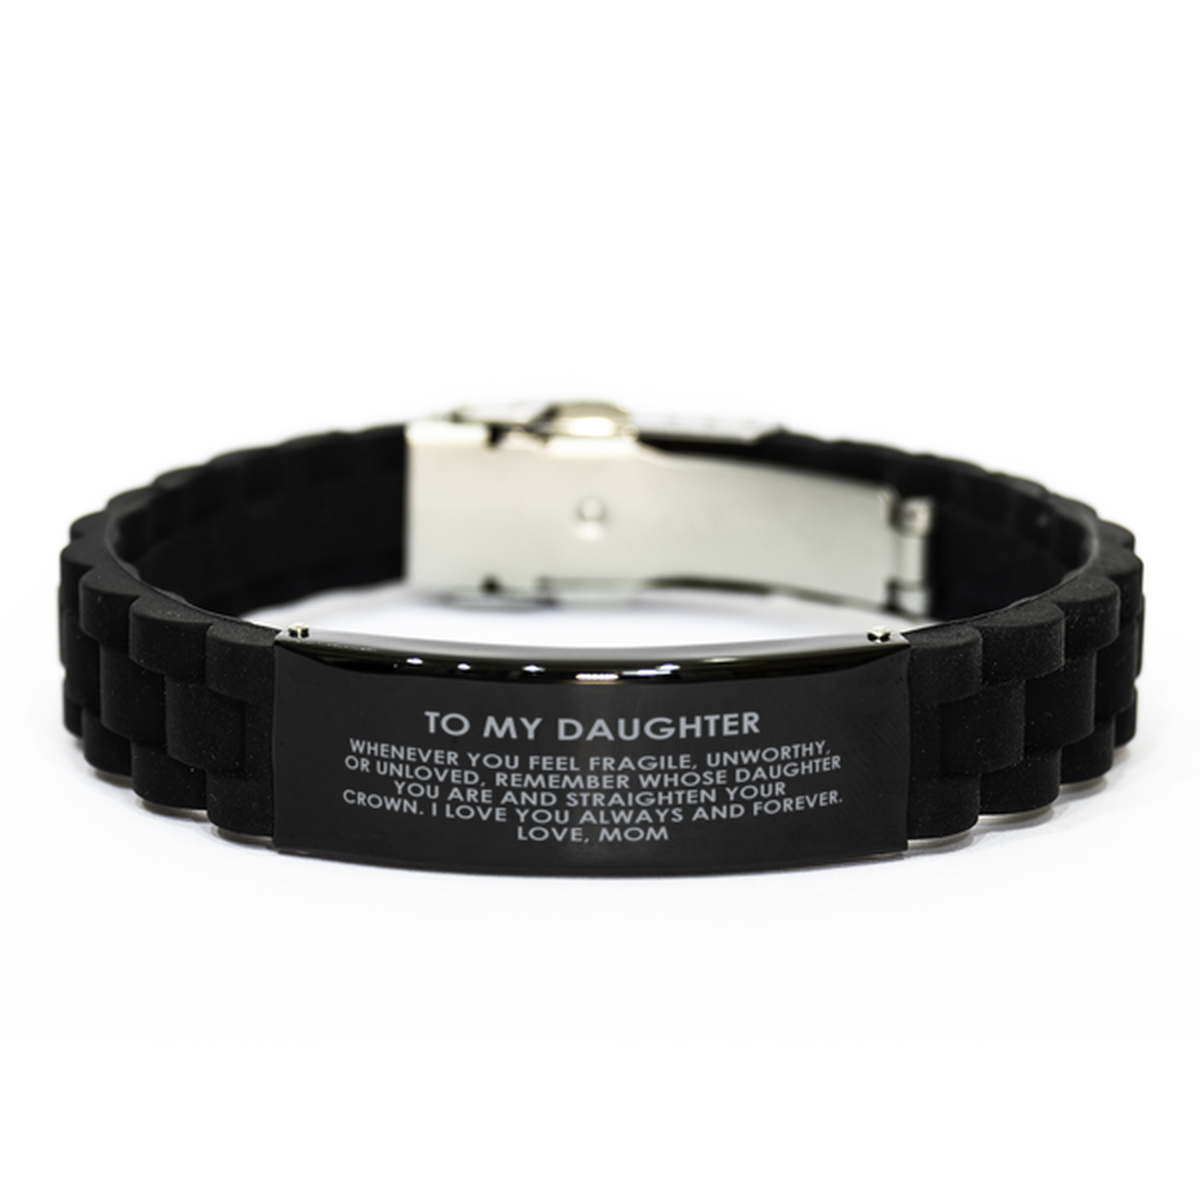 To My Daughter Black Bracelet, I Love You Always And Forever, Birthday Gifts For Daughter From Mom, Christmas Gifts For Women